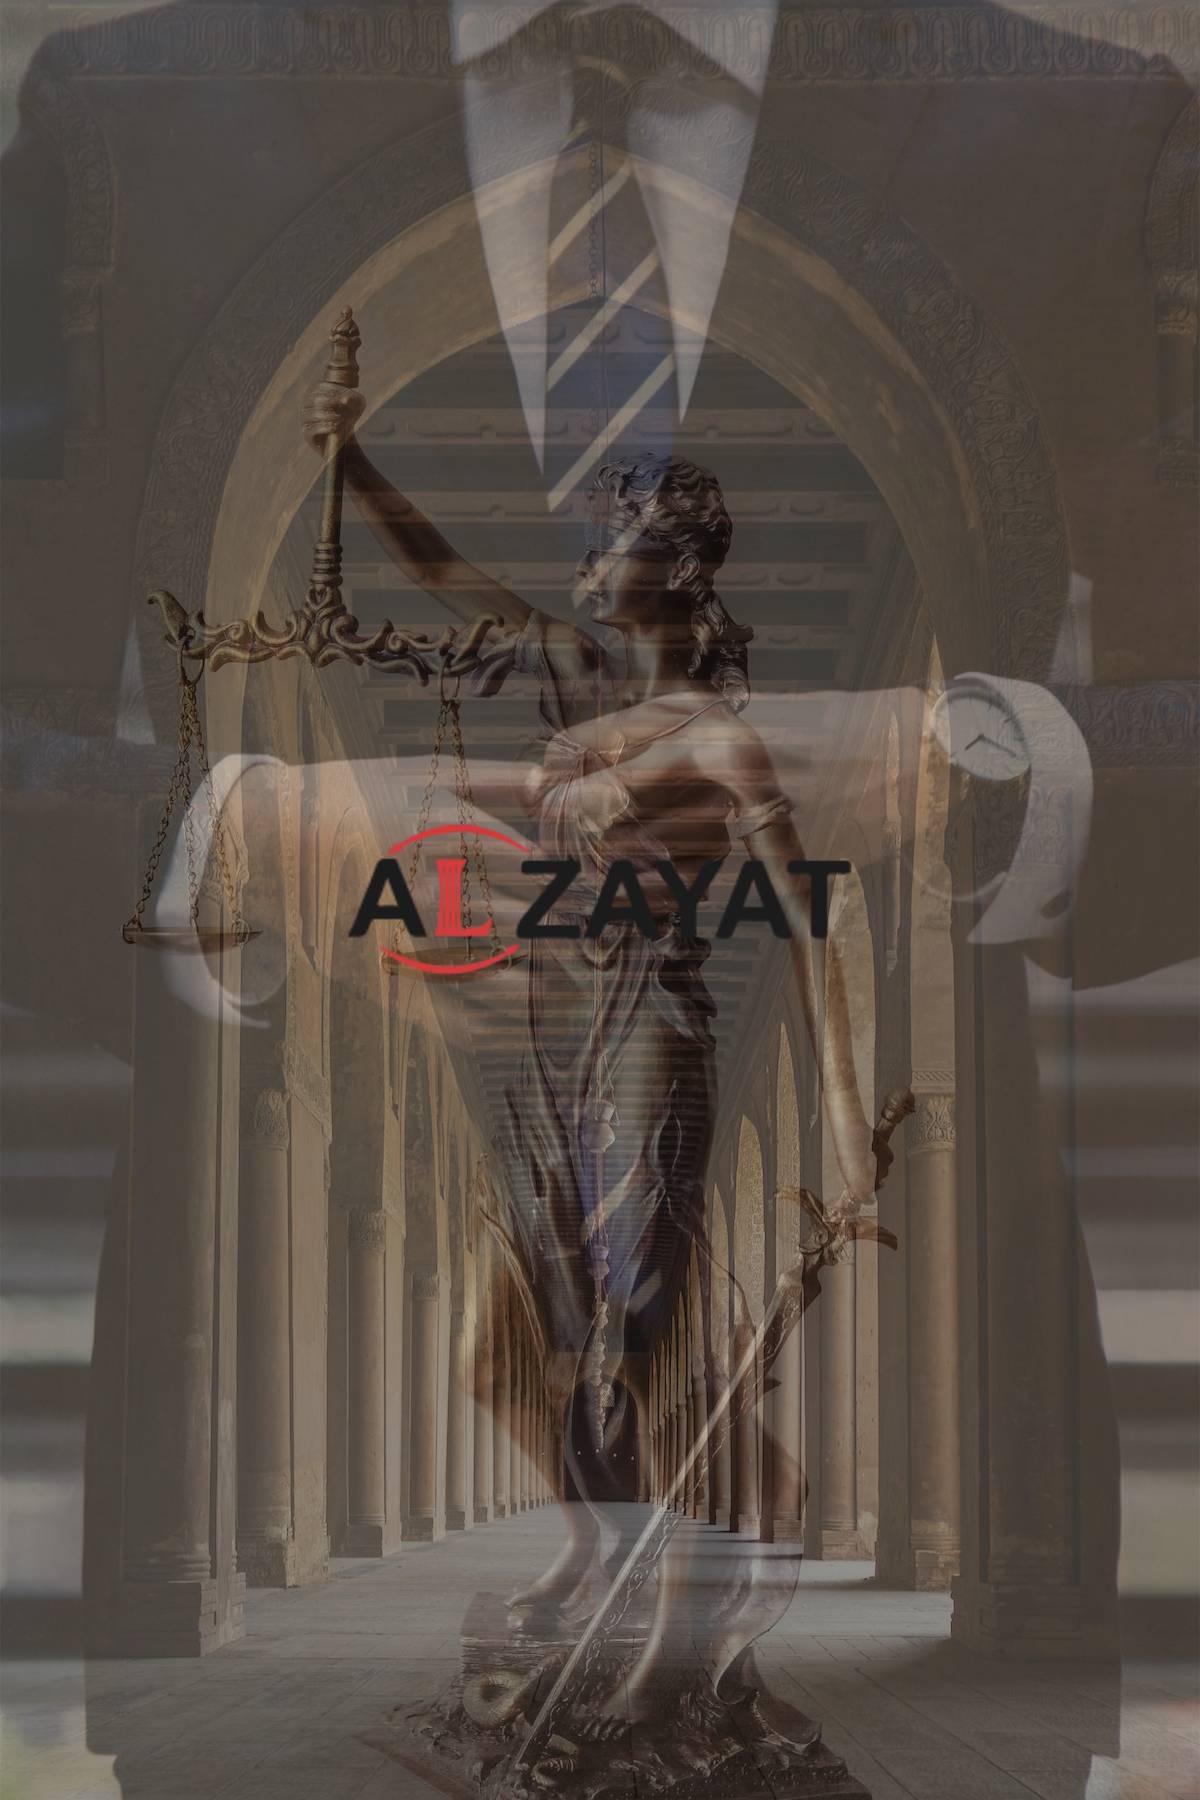 Contact-the-Best-MA-Lawyers-in-Egypt